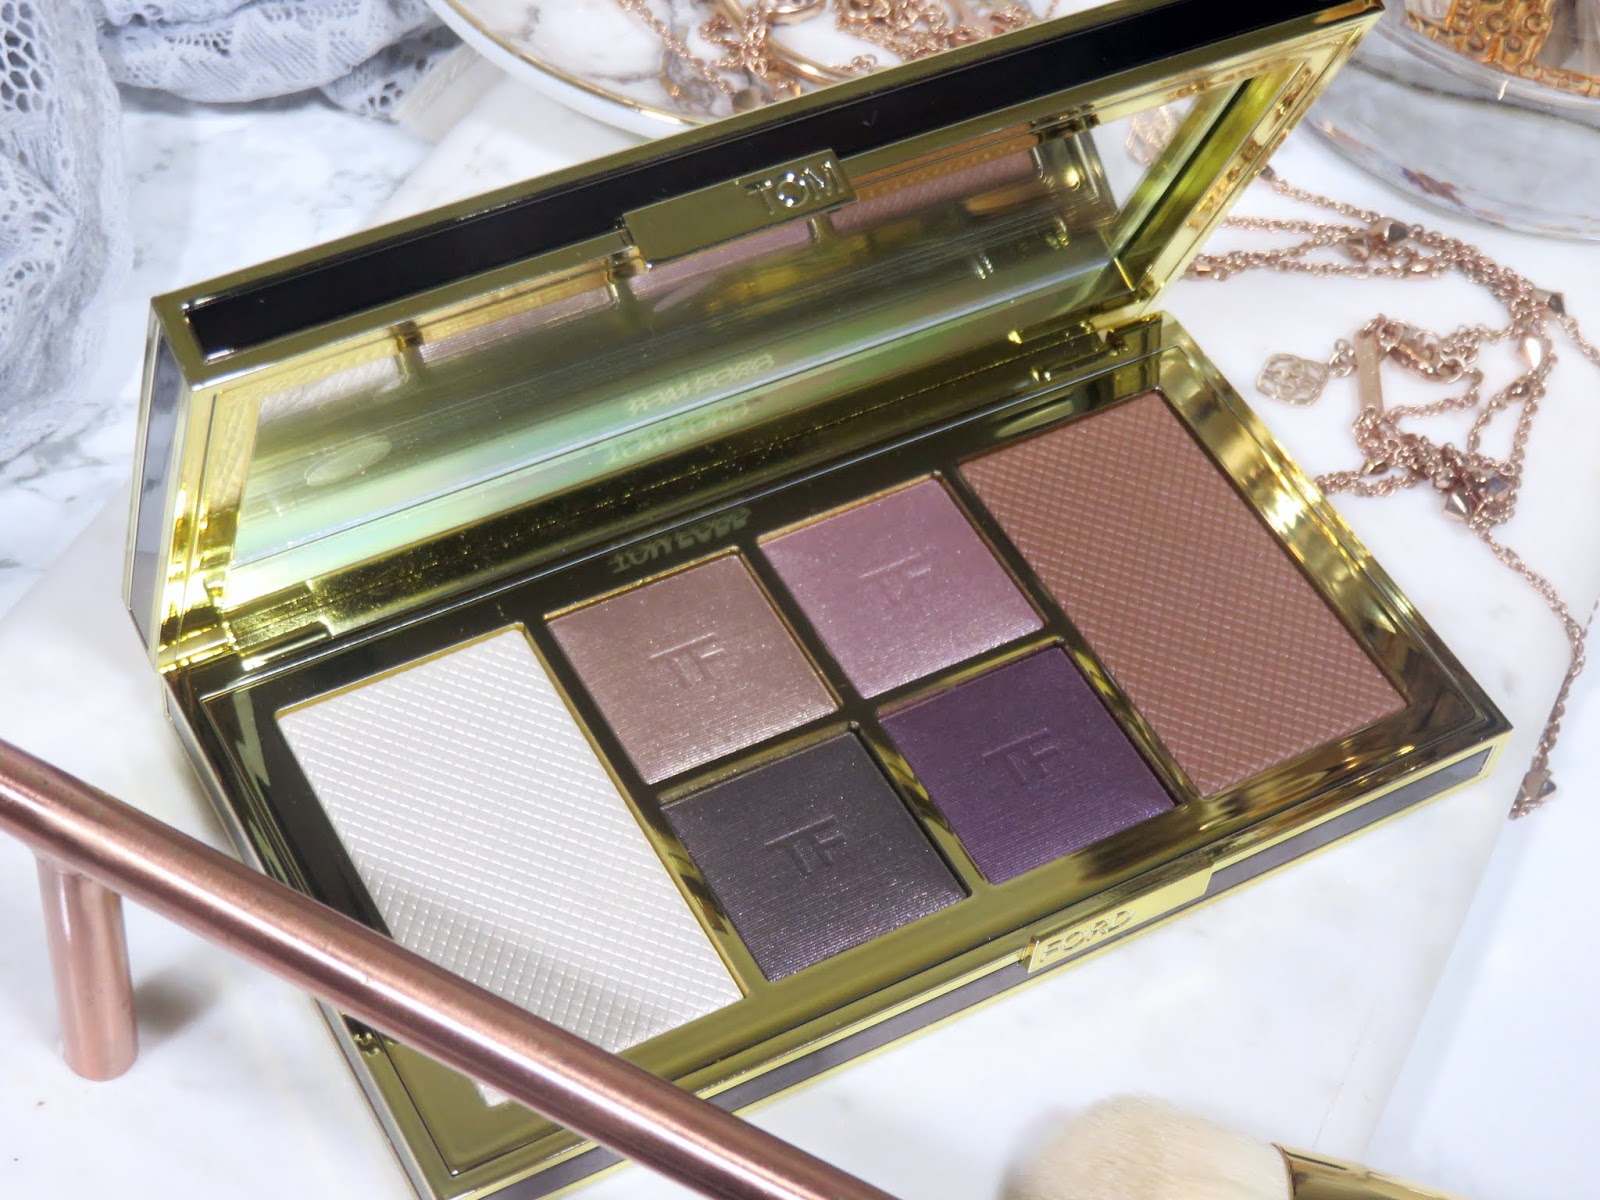 Tom Ford Shade and Illuminate Face & Eye Palette in Moonlit Violet Review and Swatches